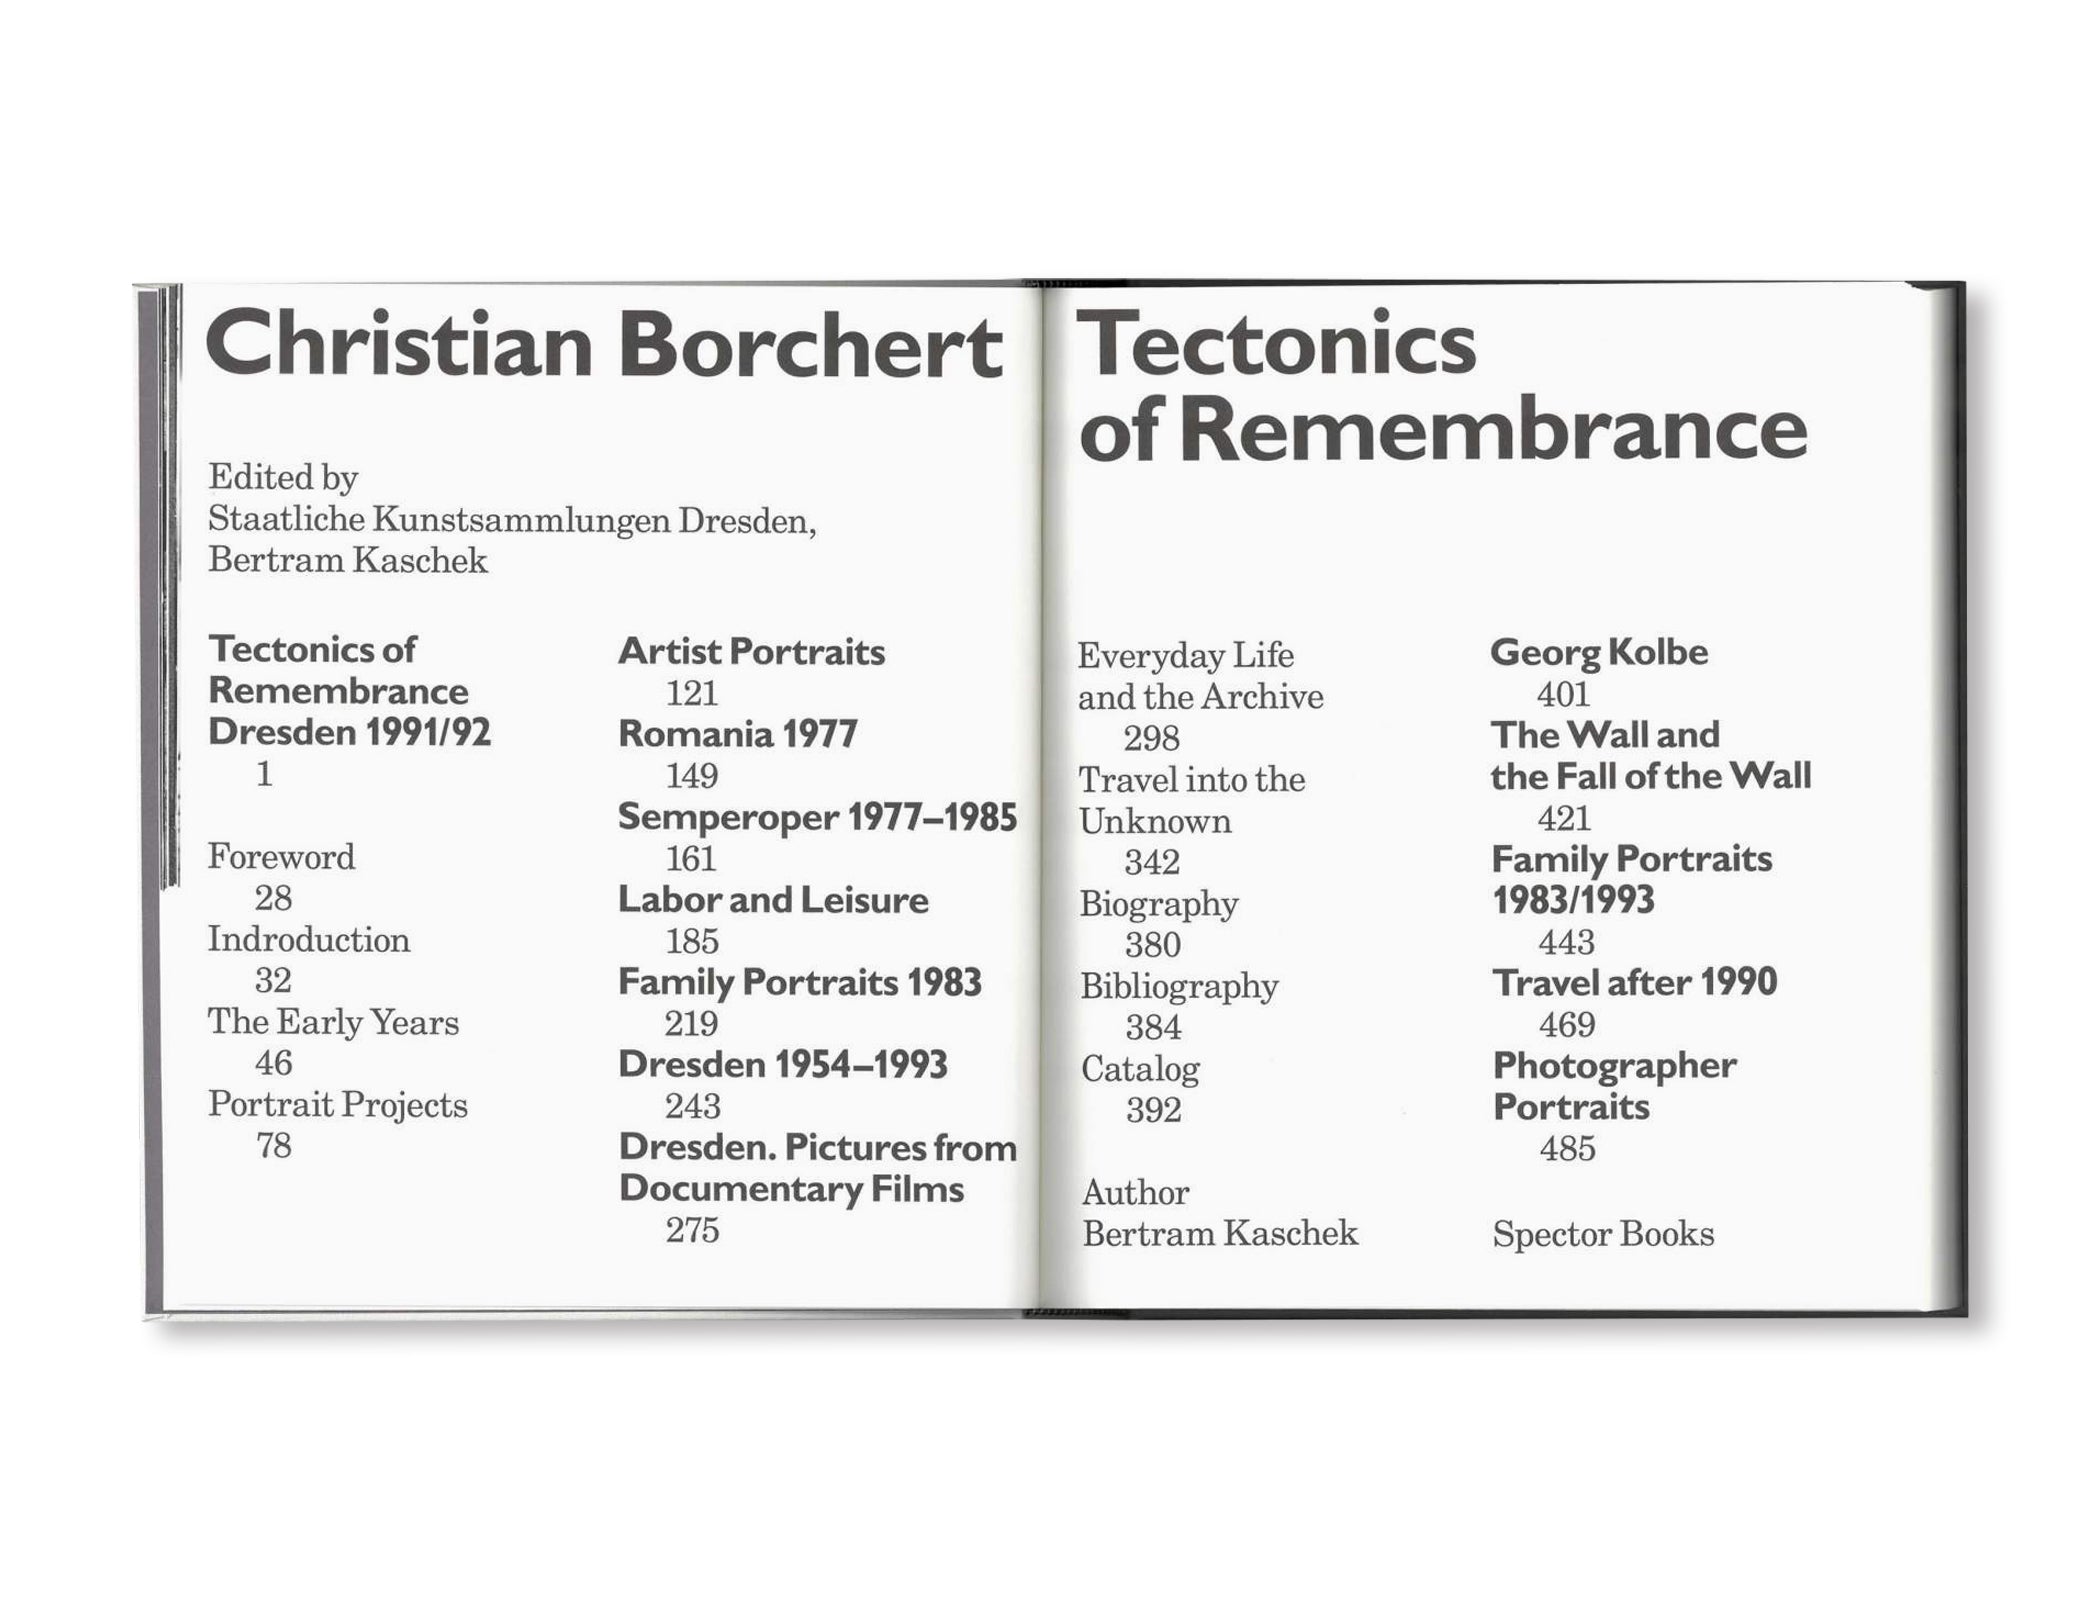 THE TECTONICS OF REMEMBRANCE by Christian Borchert